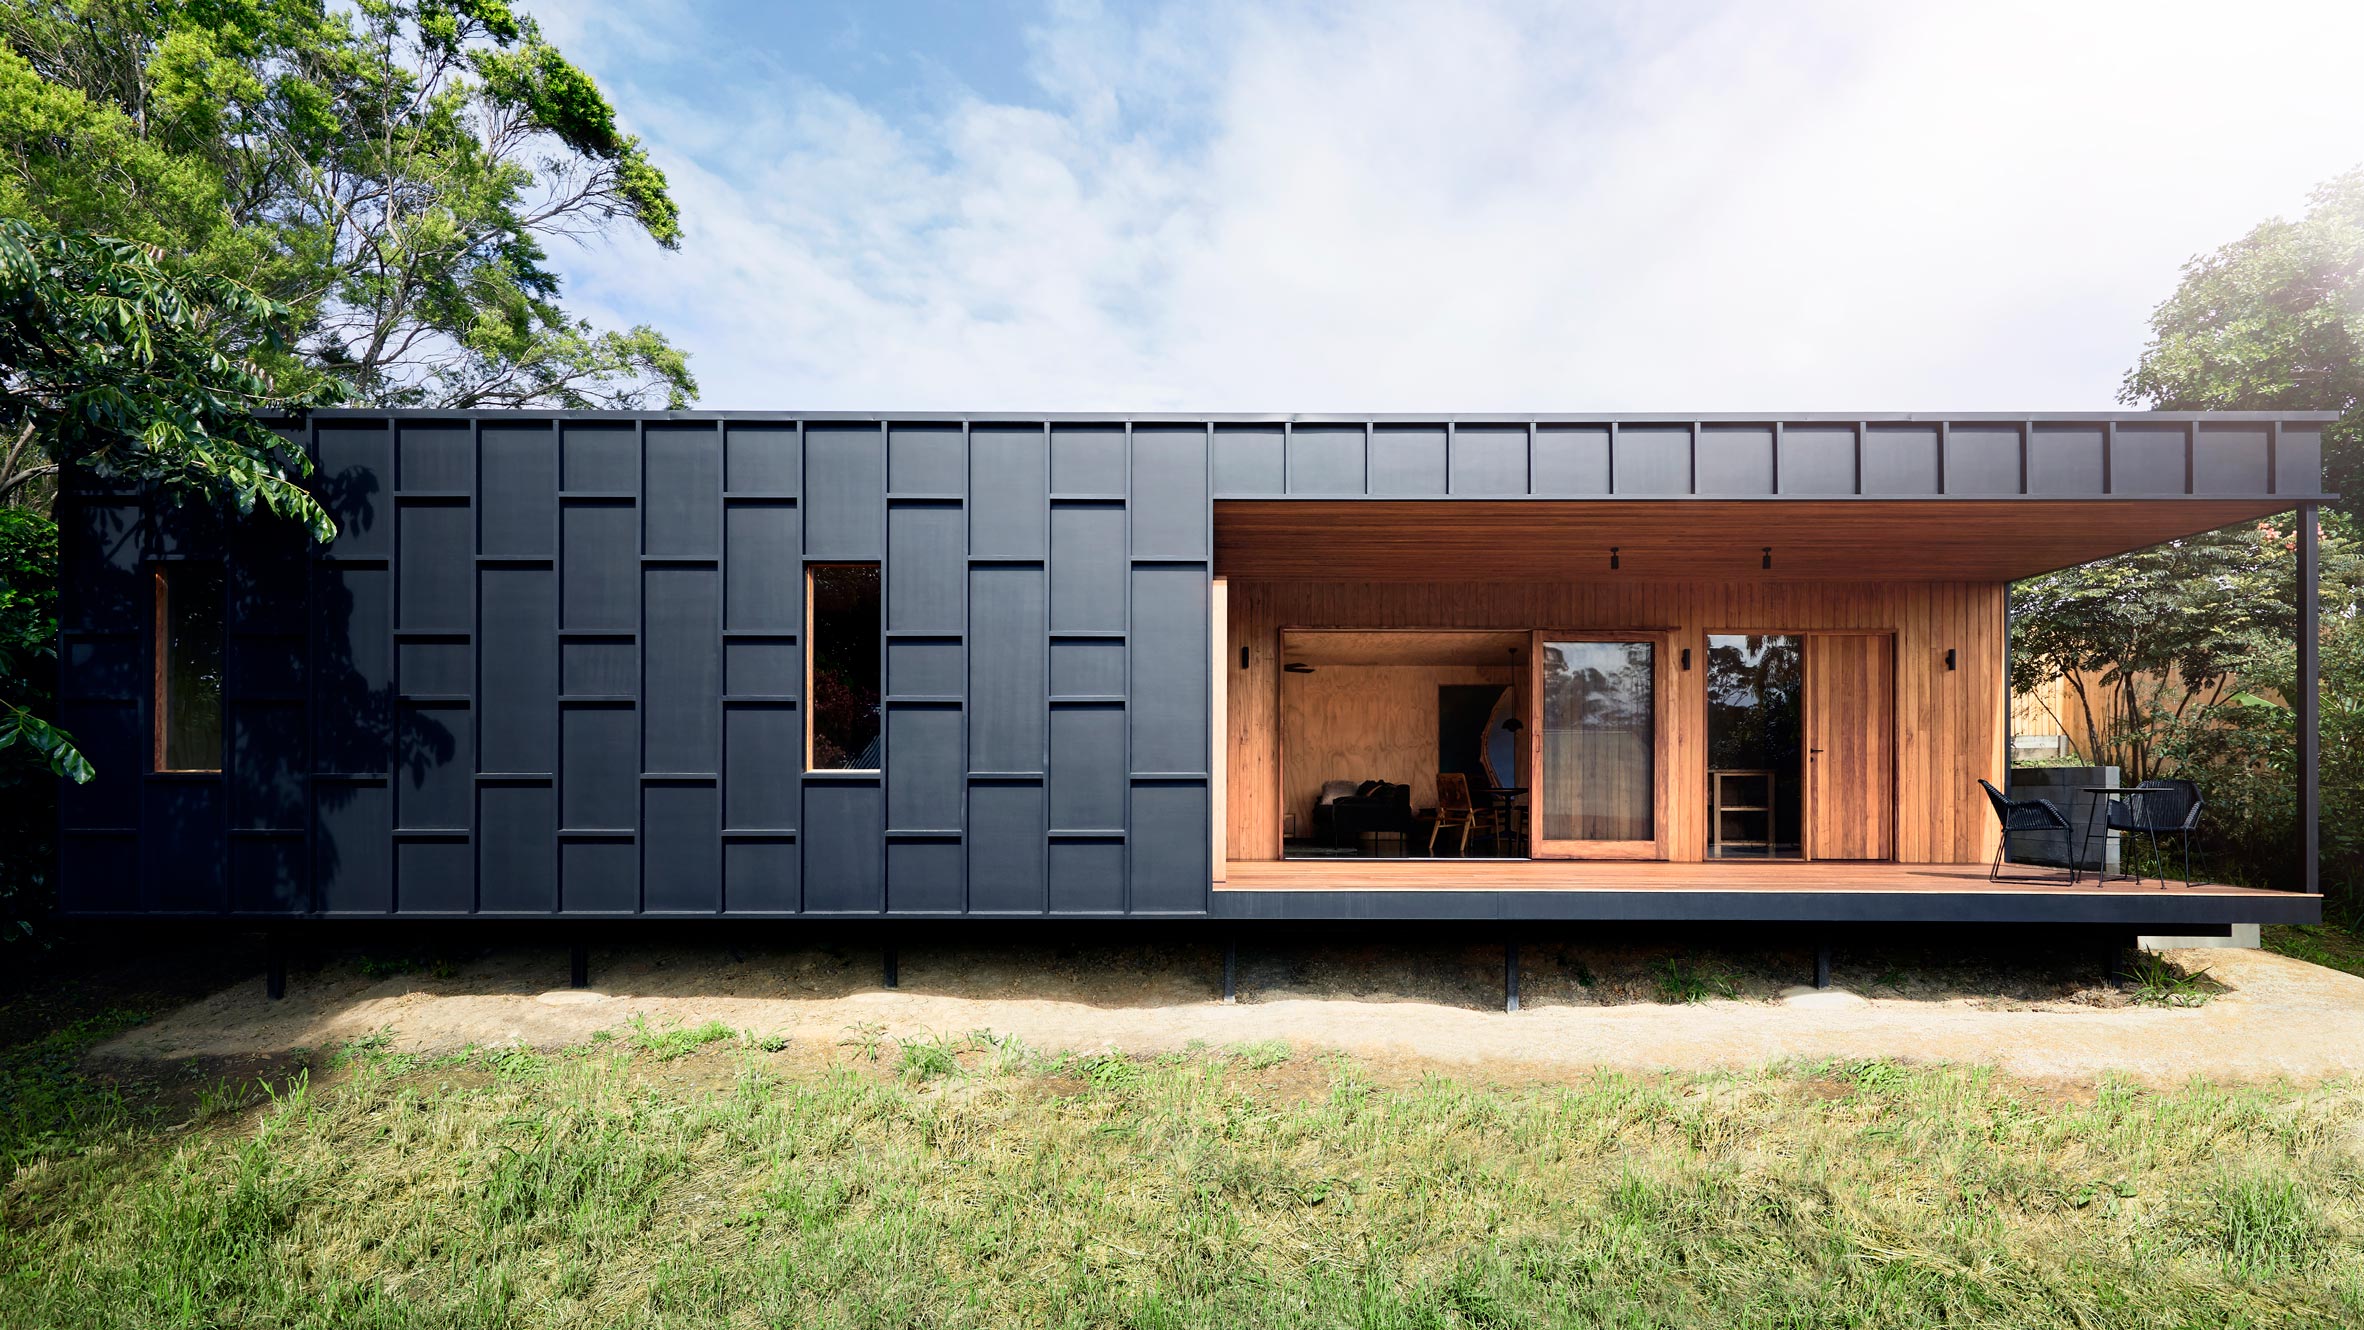 A single-story house featuring dark panel cladding and a cut-out opening to the interior, which is lined in plywood. 